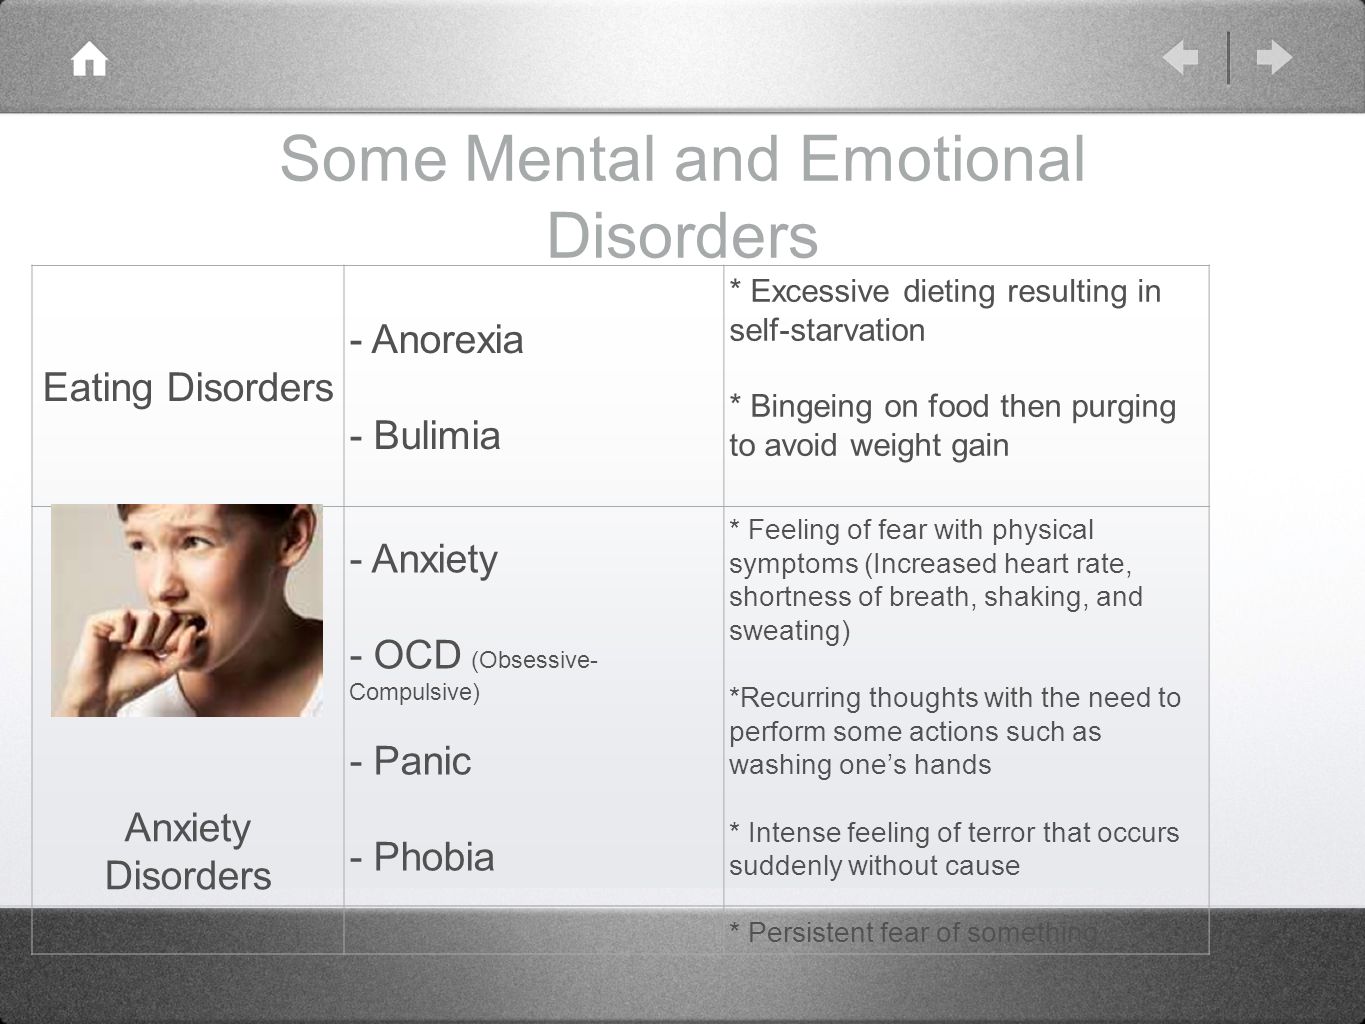 Some Mental and Emotional Disorders Eating Disorders - Anorexia - Bulimia * Excessive dieting resulting in self-starvation * Bingeing on food then purging to avoid weight gain Anxiety Disorders - Anxiety - OCD (Obsessive- Compulsive) - Panic - Phobia * Feeling of fear with physical symptoms (Increased heart rate, shortness of breath, shaking, and sweating) *Recurring thoughts with the need to perform some actions such as washing one’s hands * Intense feeling of terror that occurs suddenly without cause * Persistent fear of something